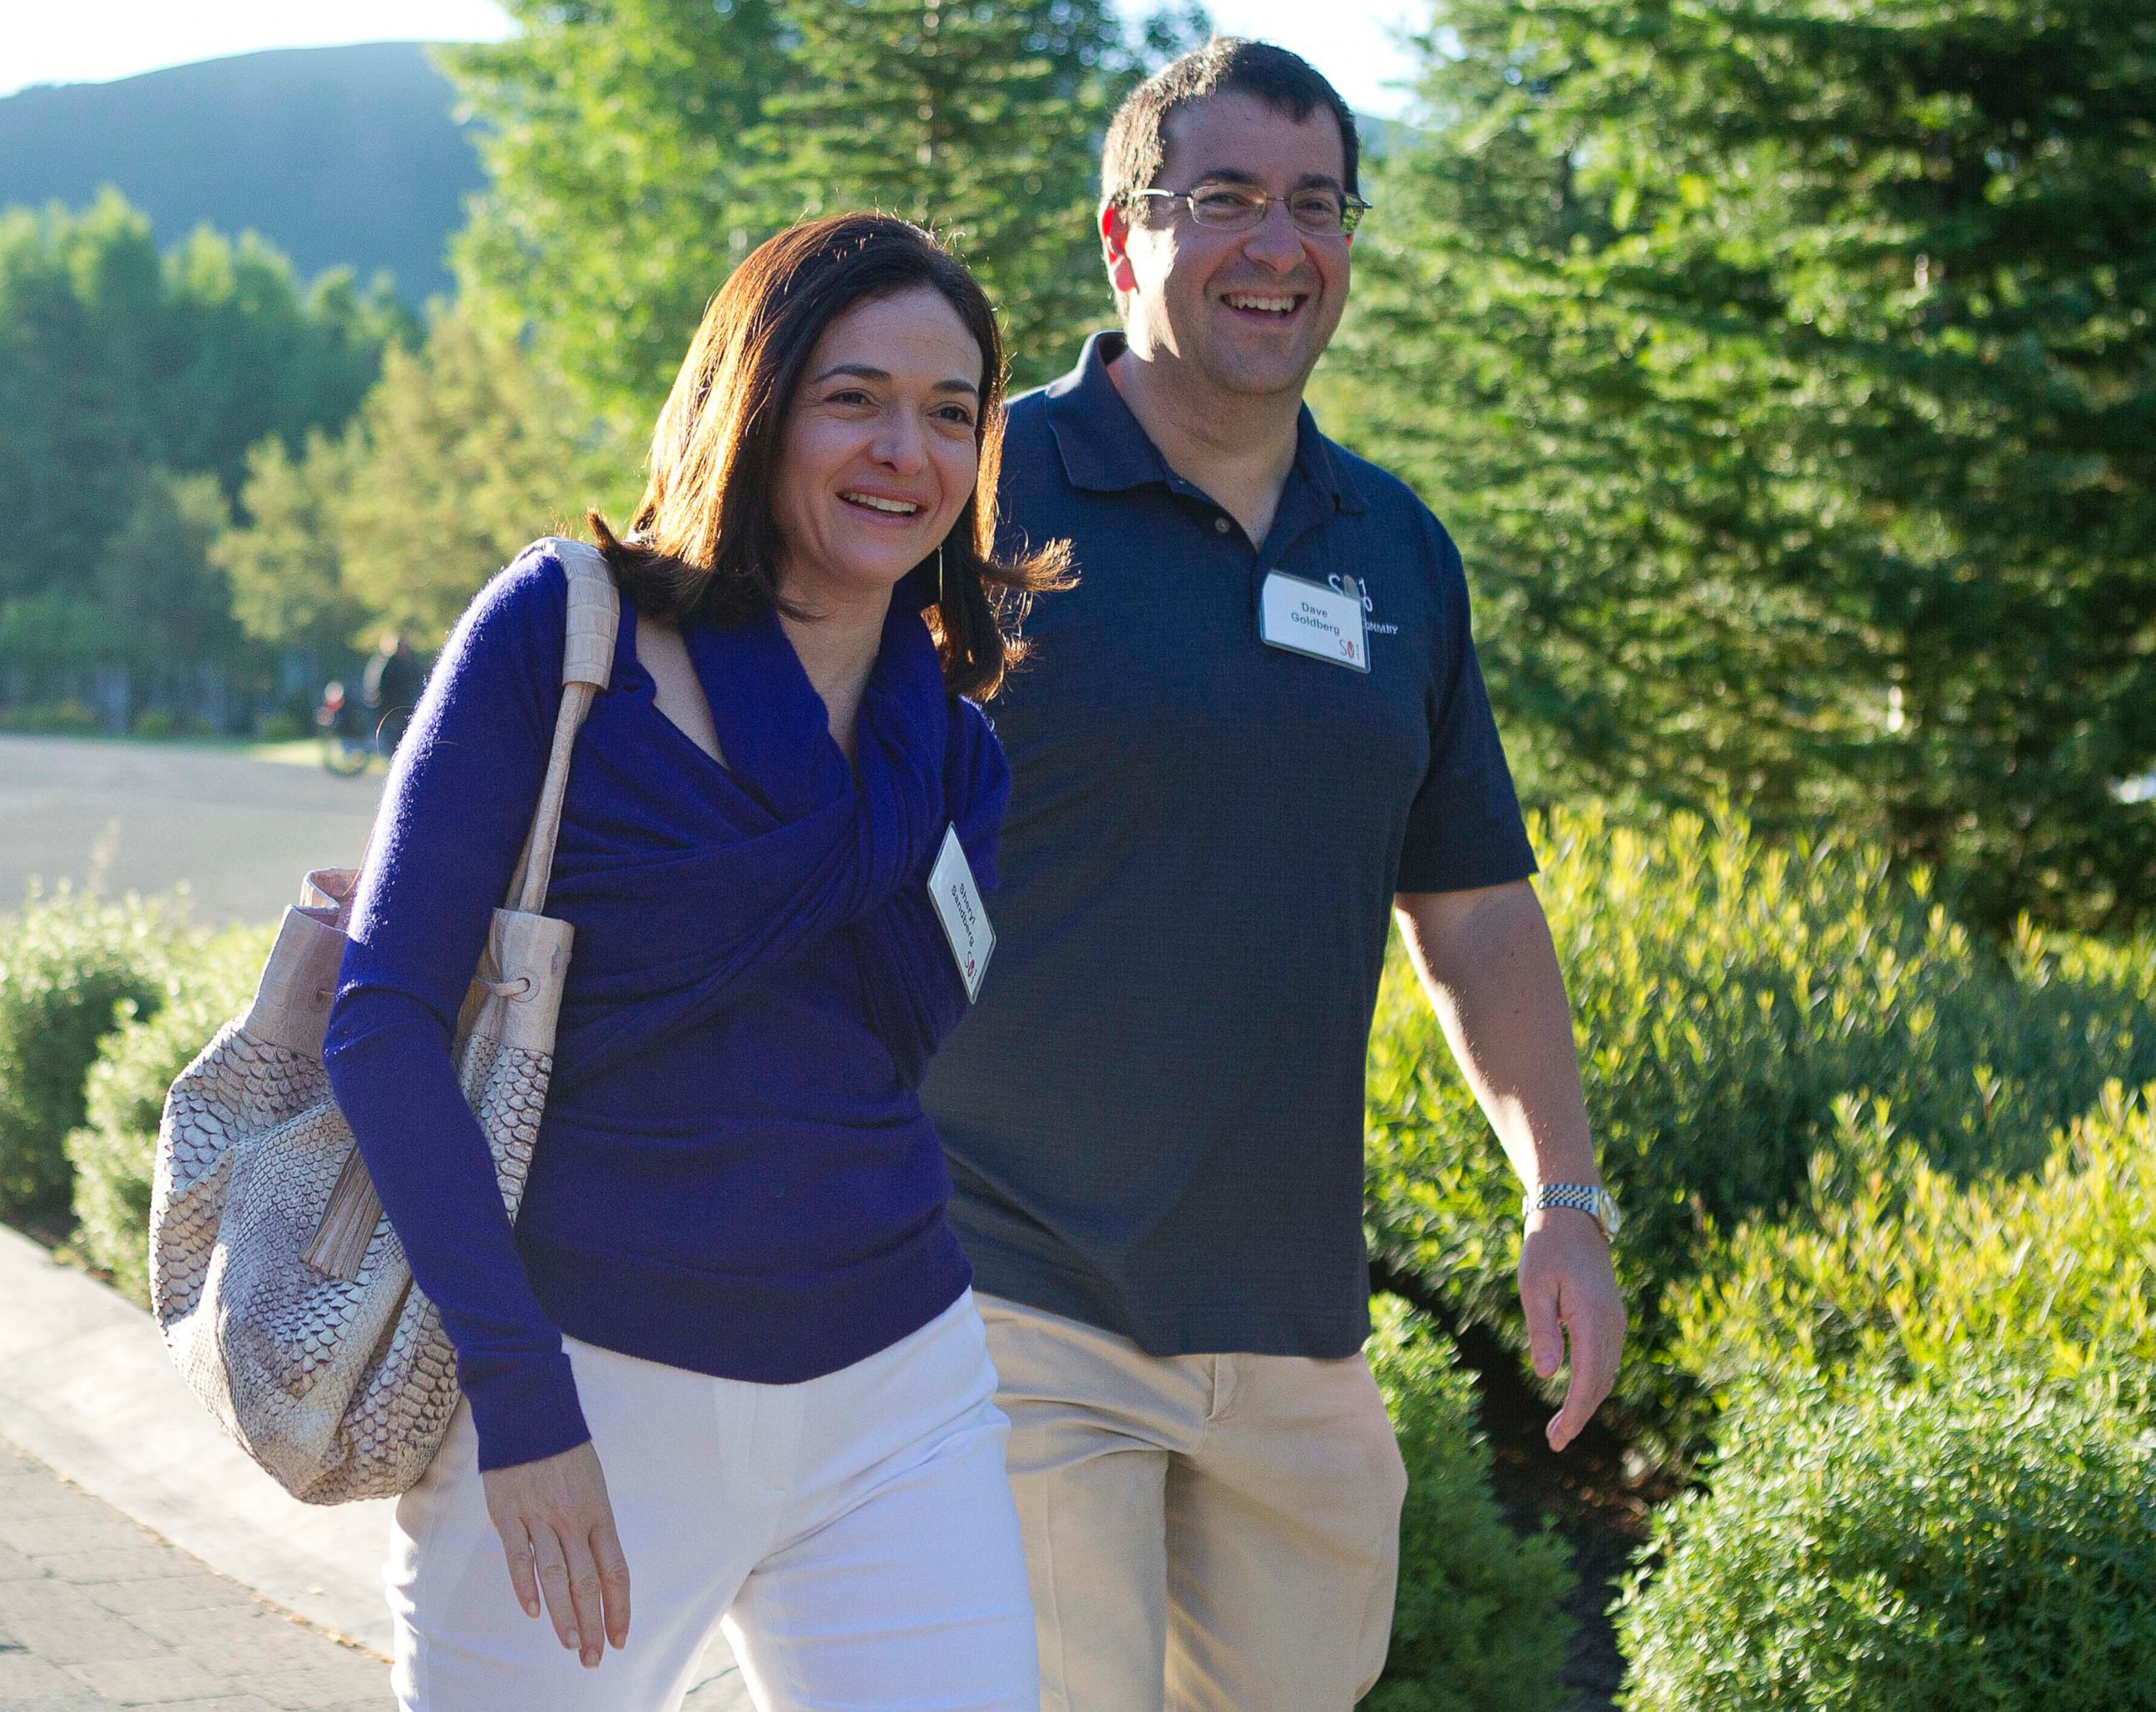 PHOTO: Facebook chief operating officer Sheryl Sandberg, left, and Dave Goldberg, CEO of Survey Monkey, arrive at the Sun Valley Inn for the 2011 Allen and Co. Sun Valley Conference, July 6, 2011, in Sun Valley, Idaho.